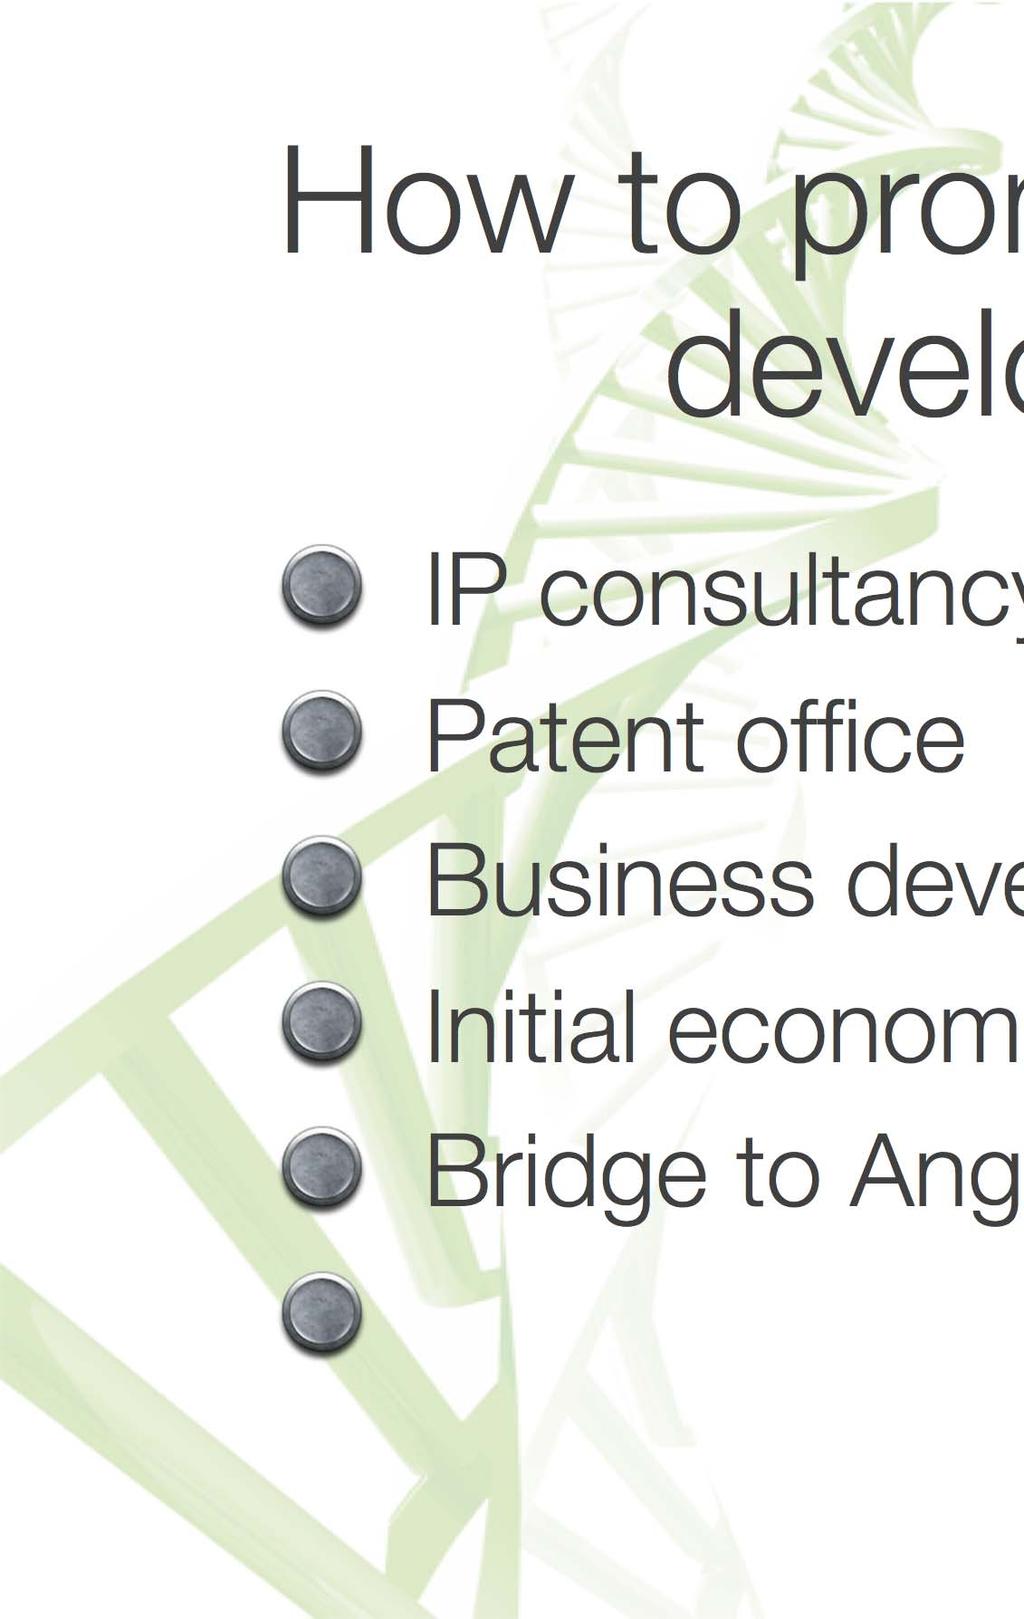 How to promote start-up development IP consultancy (freedom to operate) Patent office Business